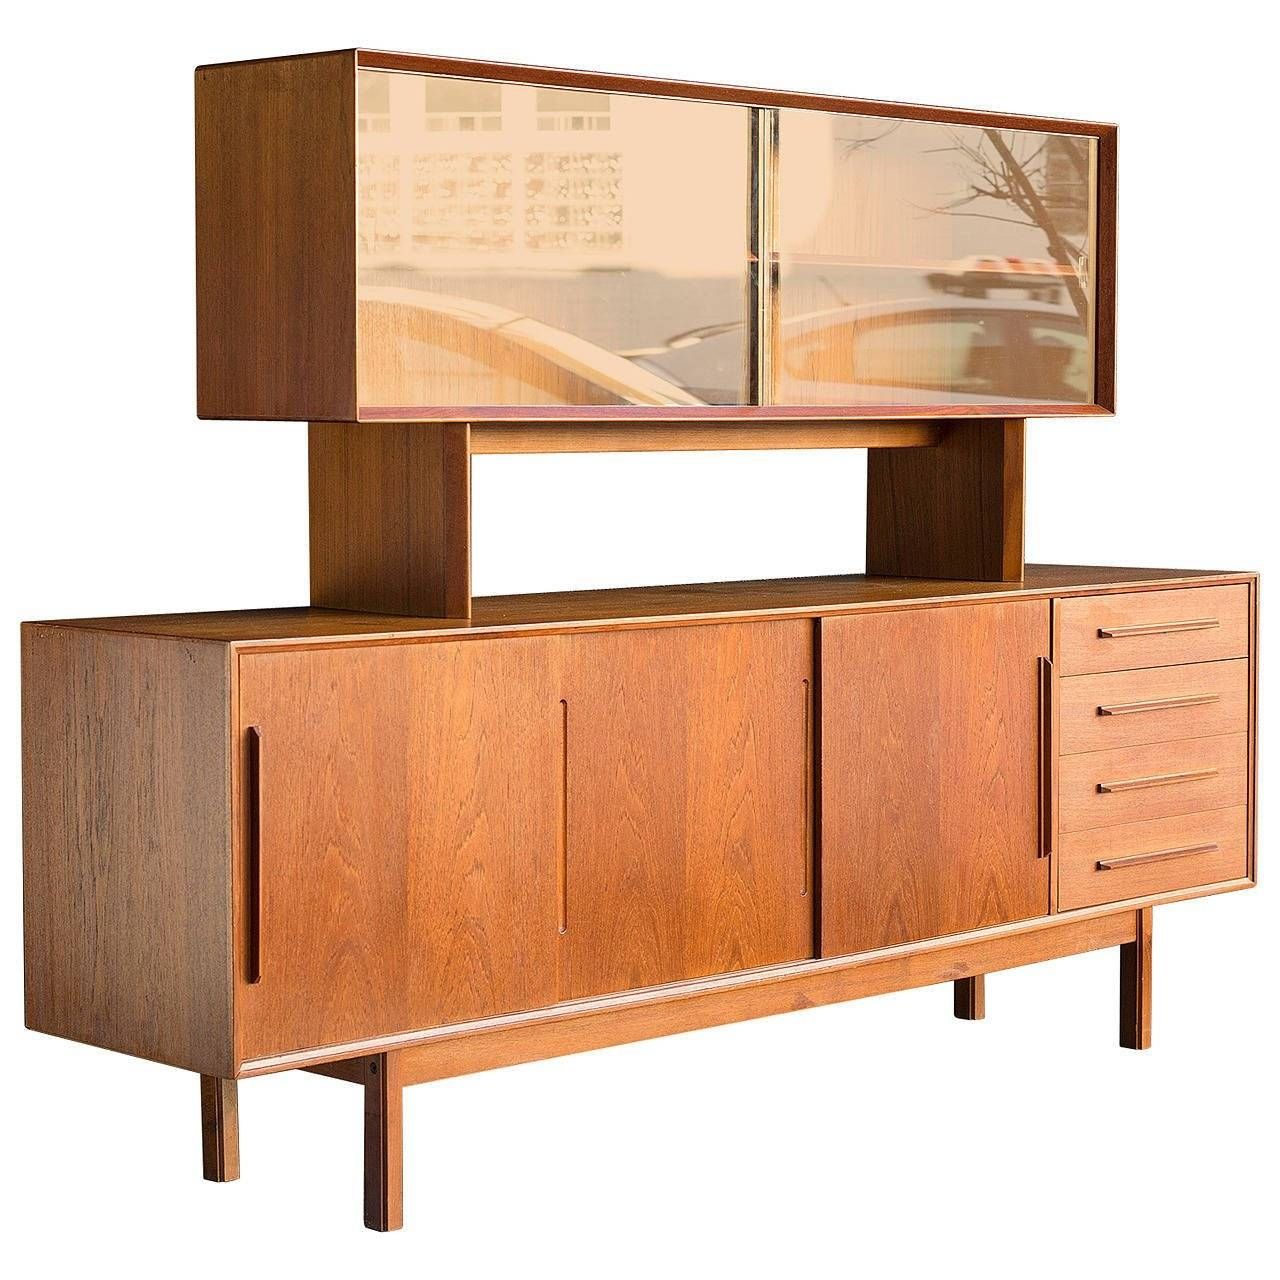 Danish Modern Sideboard With Hutch At 1stdibs Within Sideboard With Hutch (View 12 of 20)